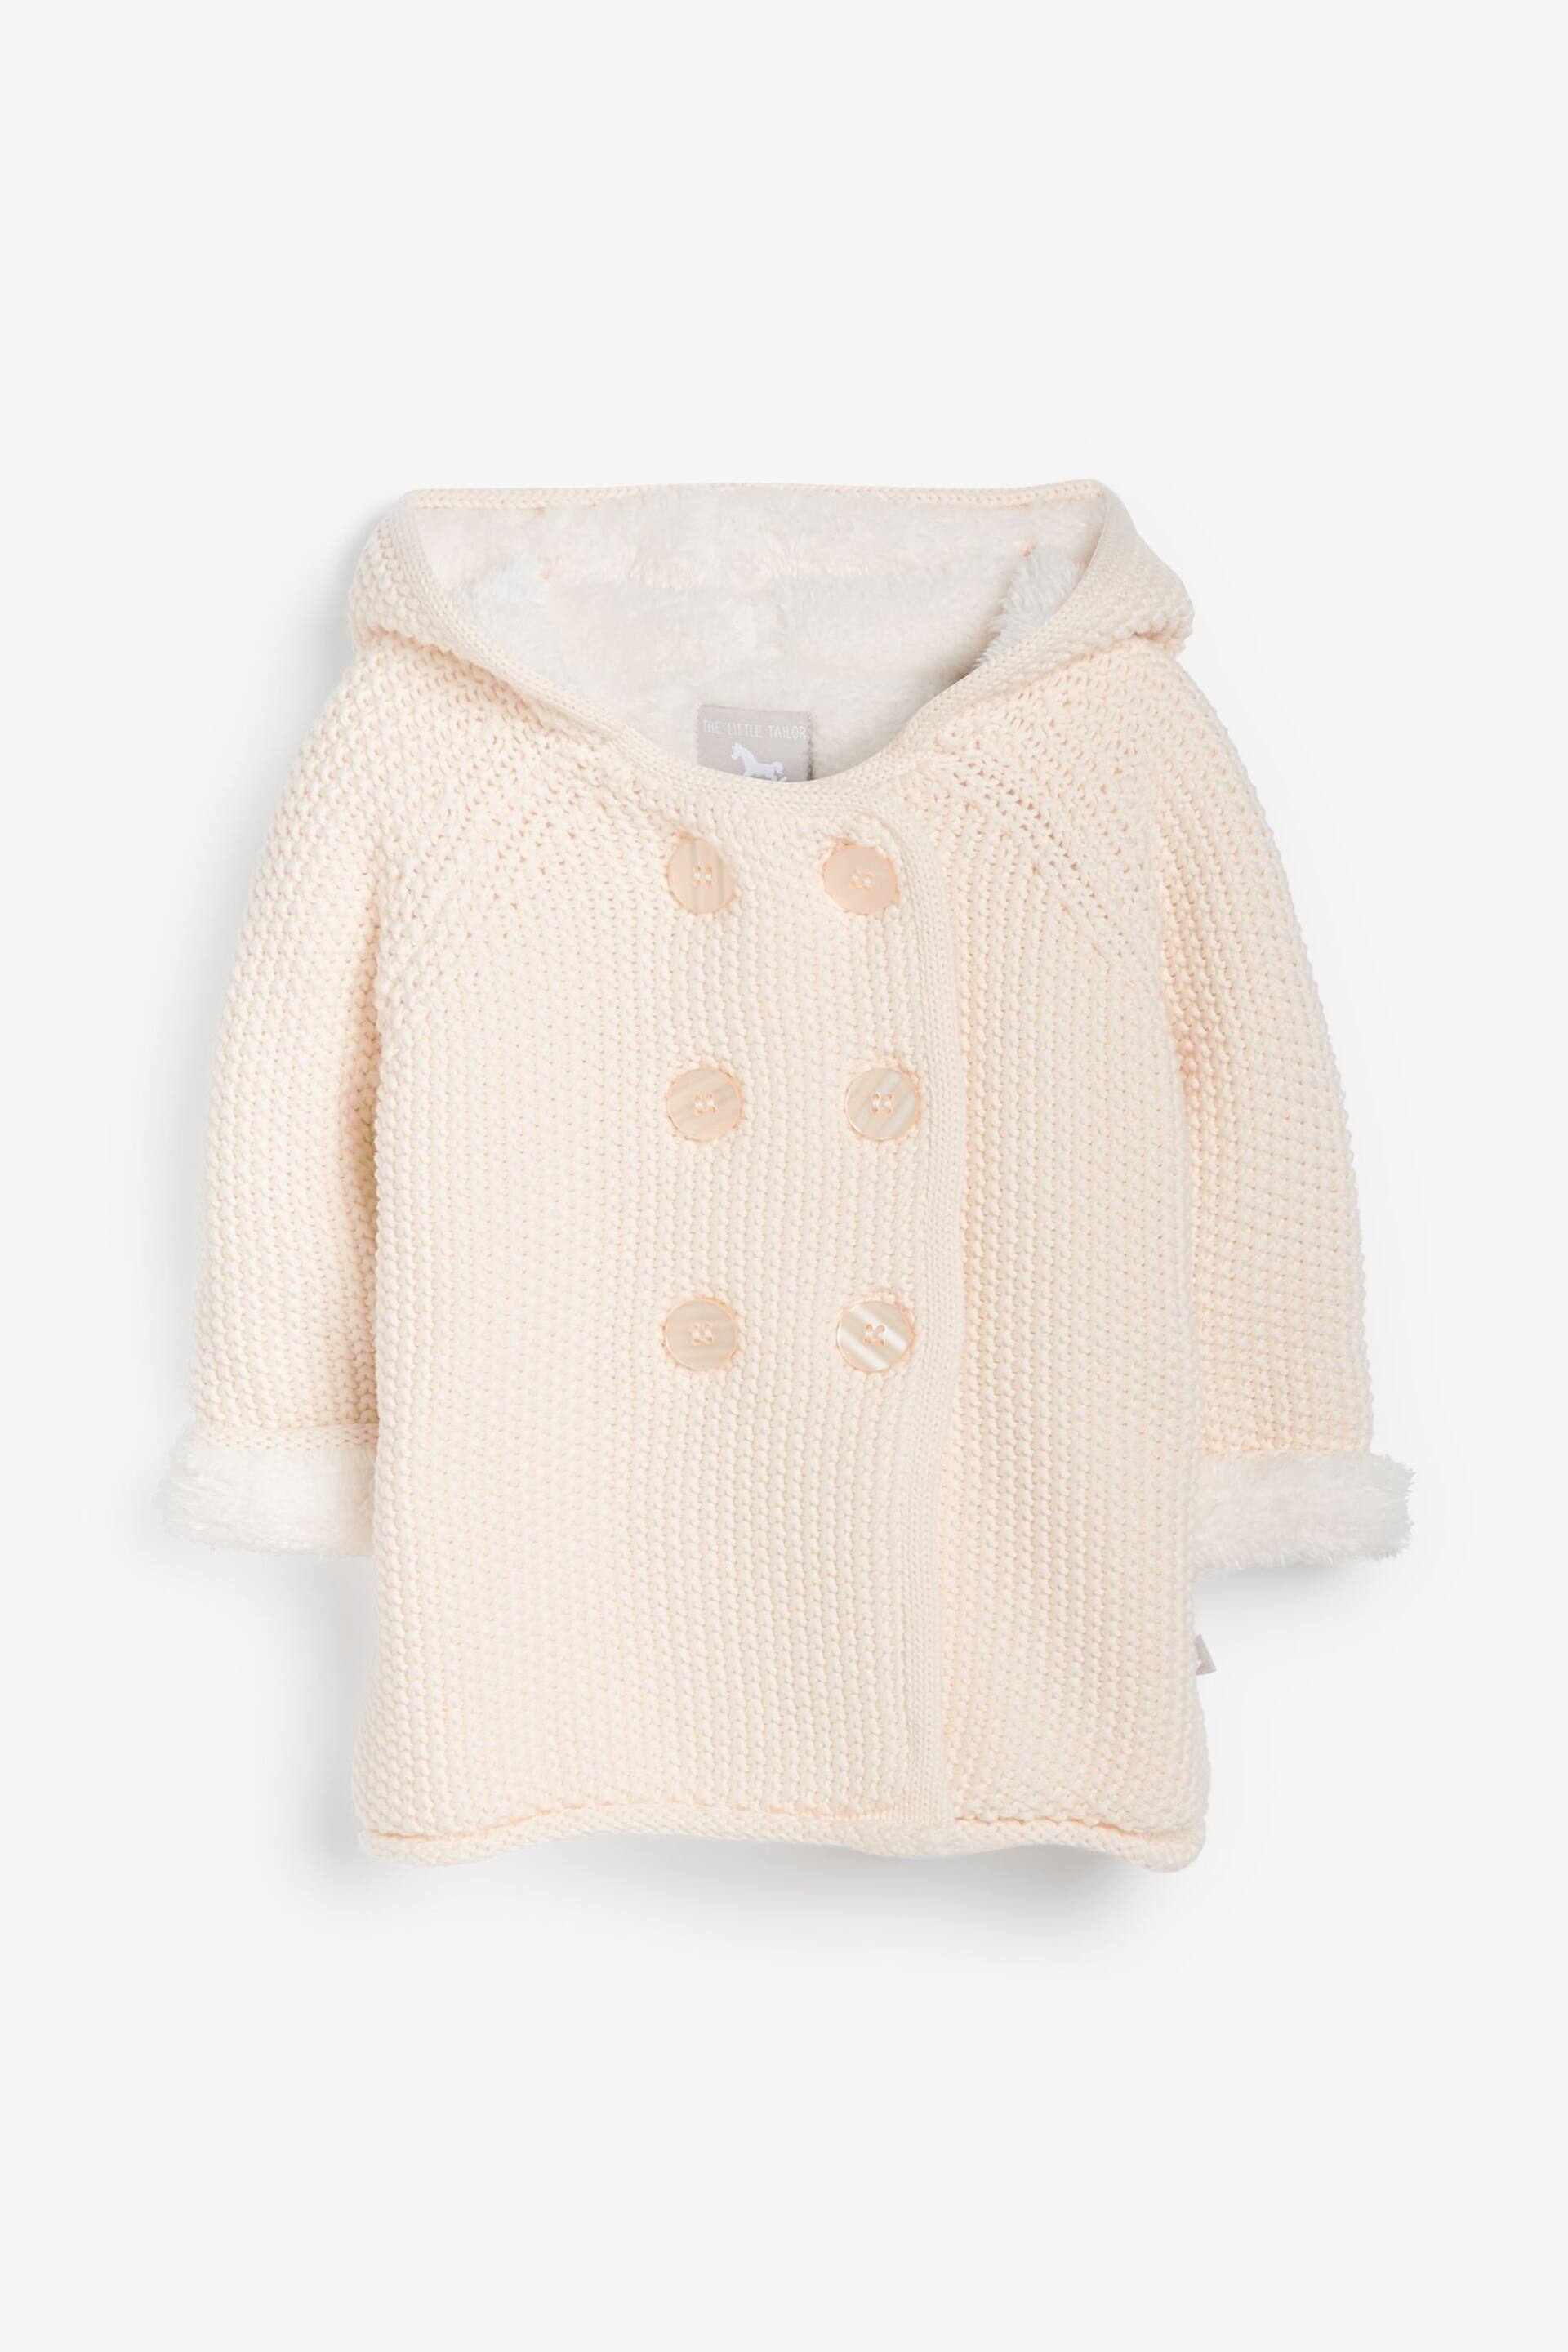 The Little Tailor Baby Plush Lined Pixie Pram Coat - Image 4 of 5